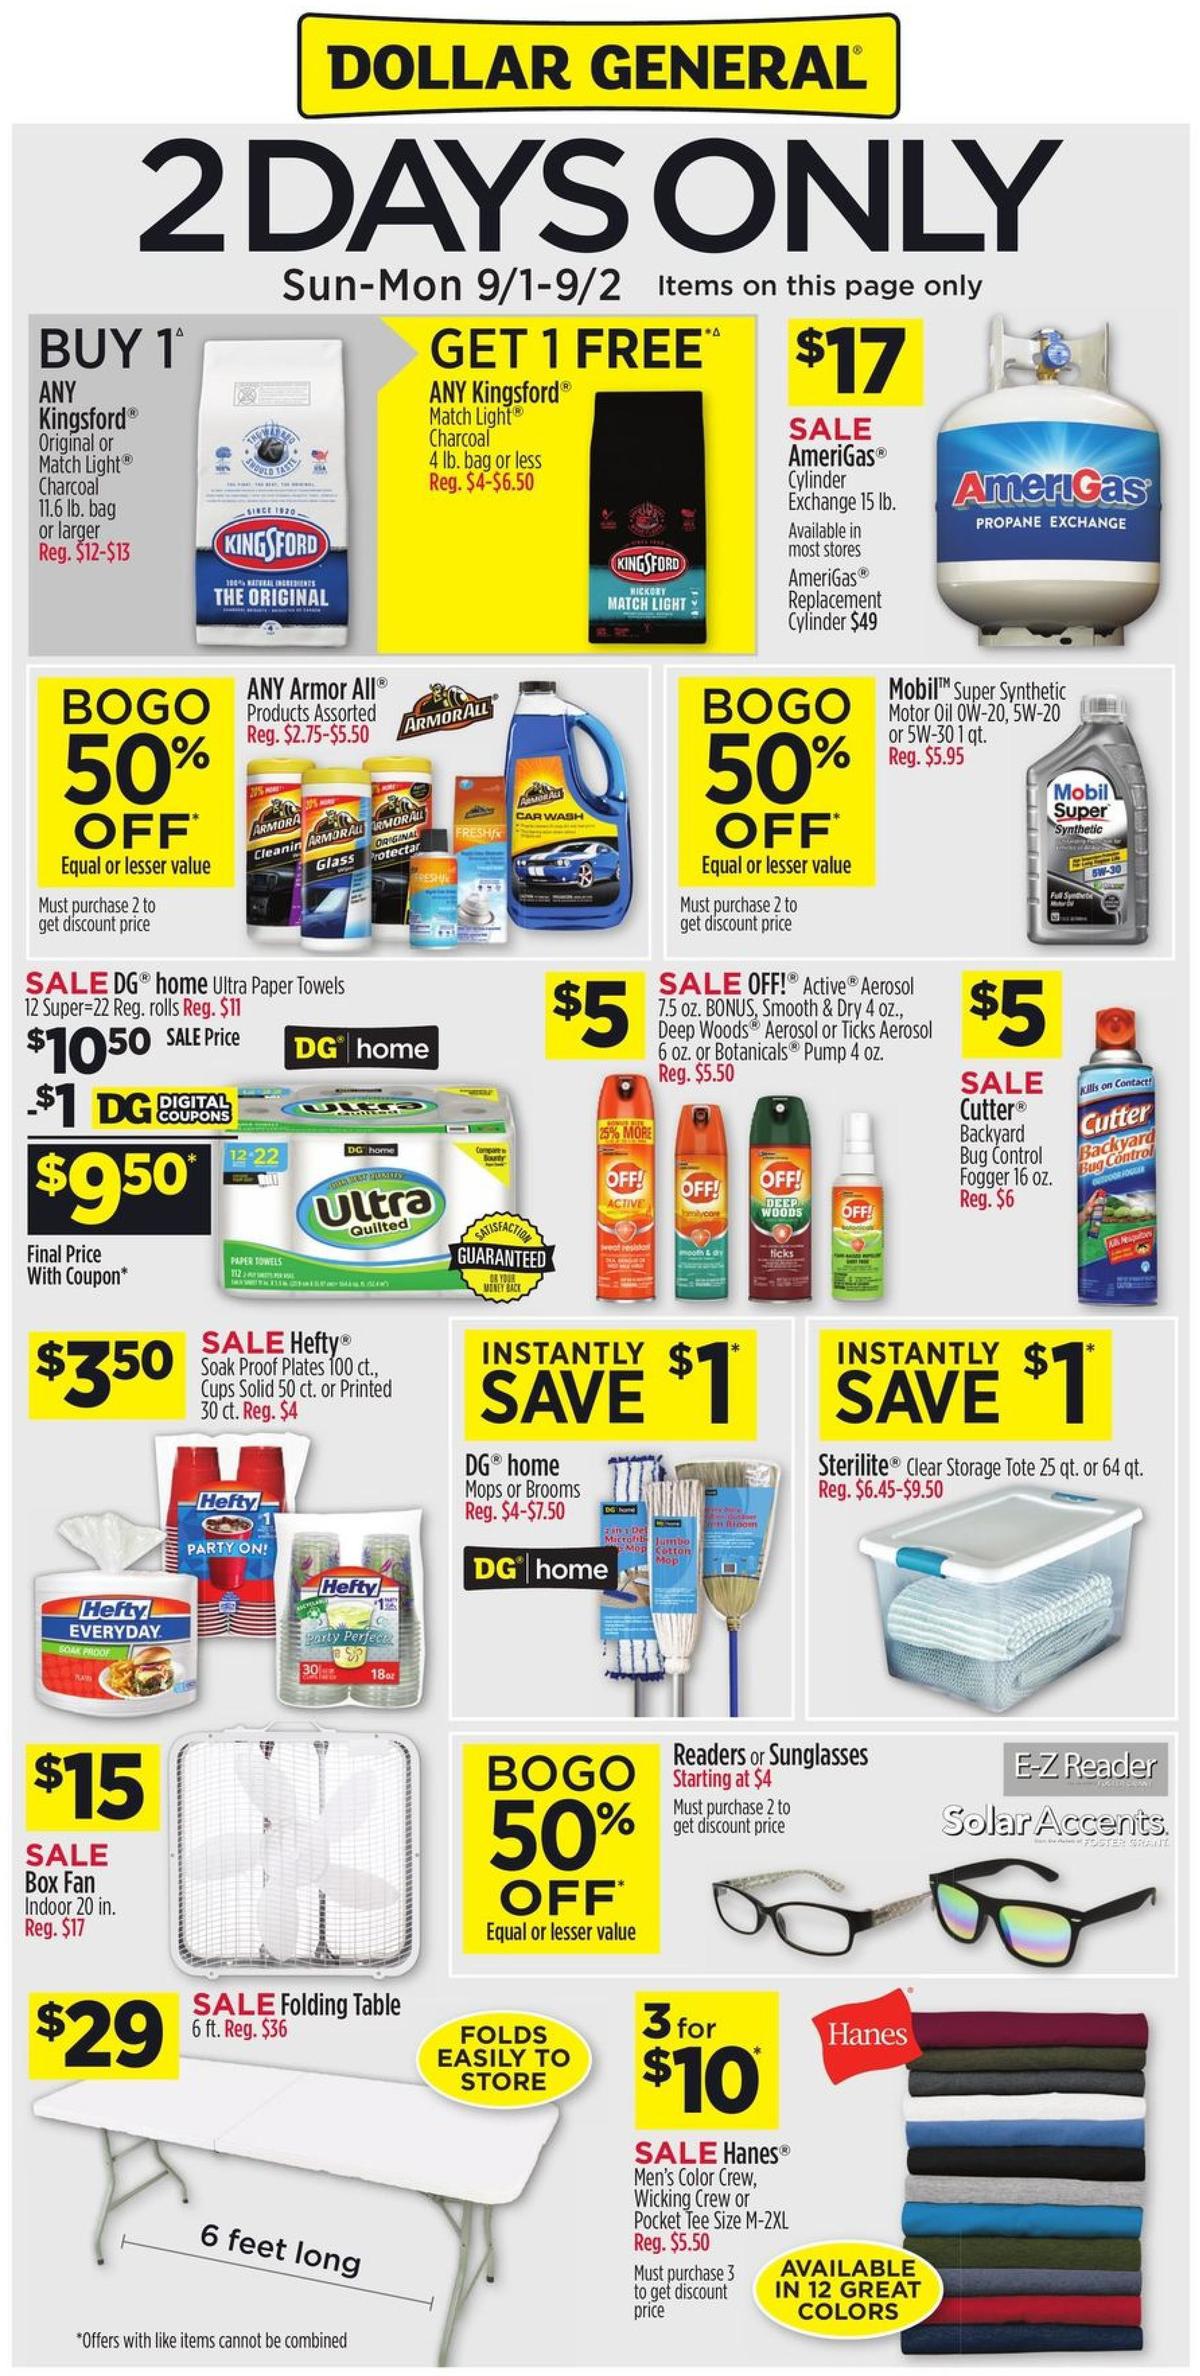 Dollar General 2 Days Only Weekly Ad from September 1